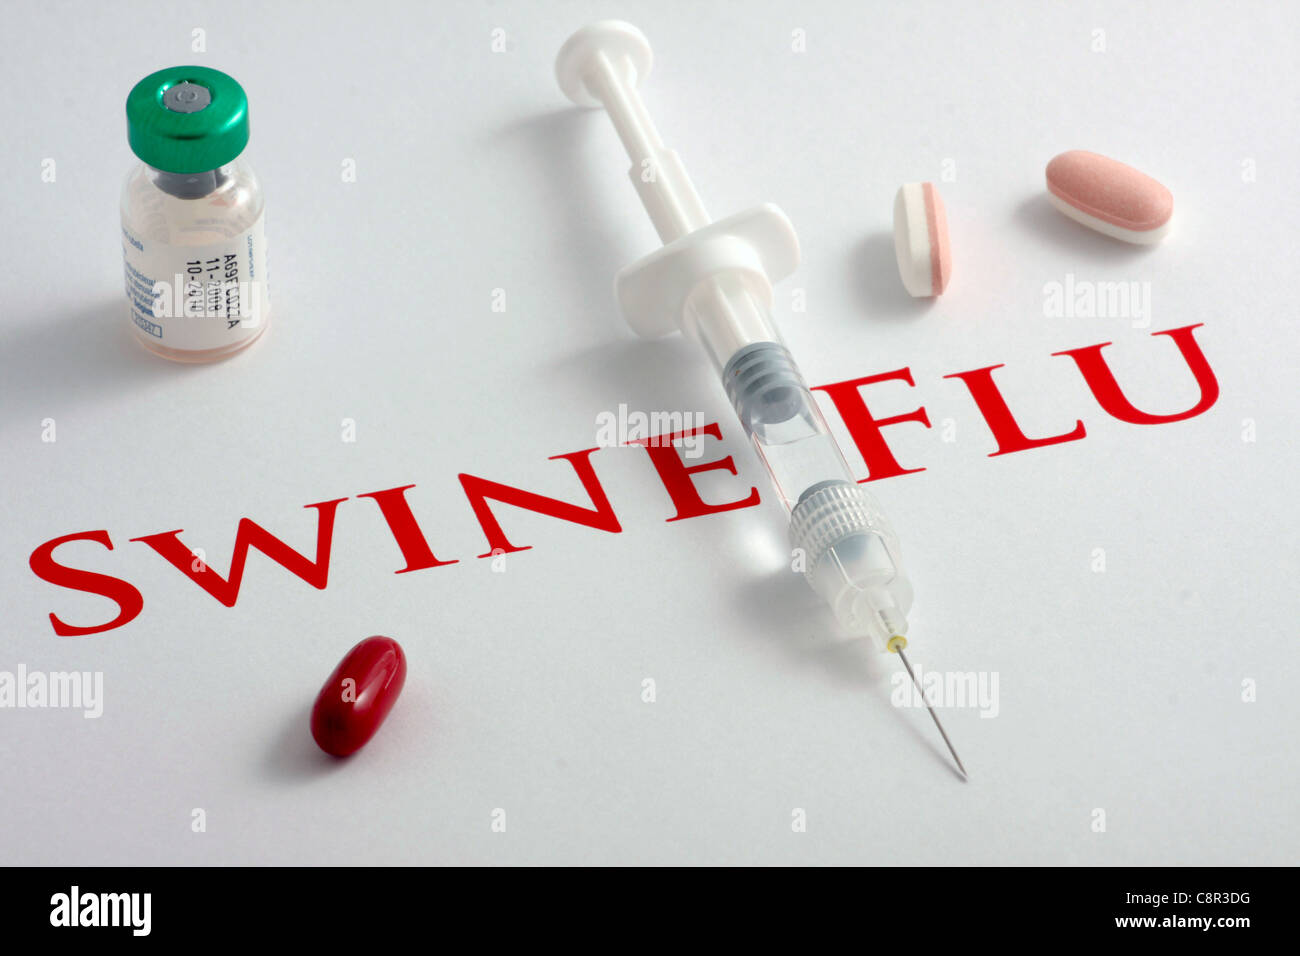 Images of the H1N1 Influenza Virus Stock Photo